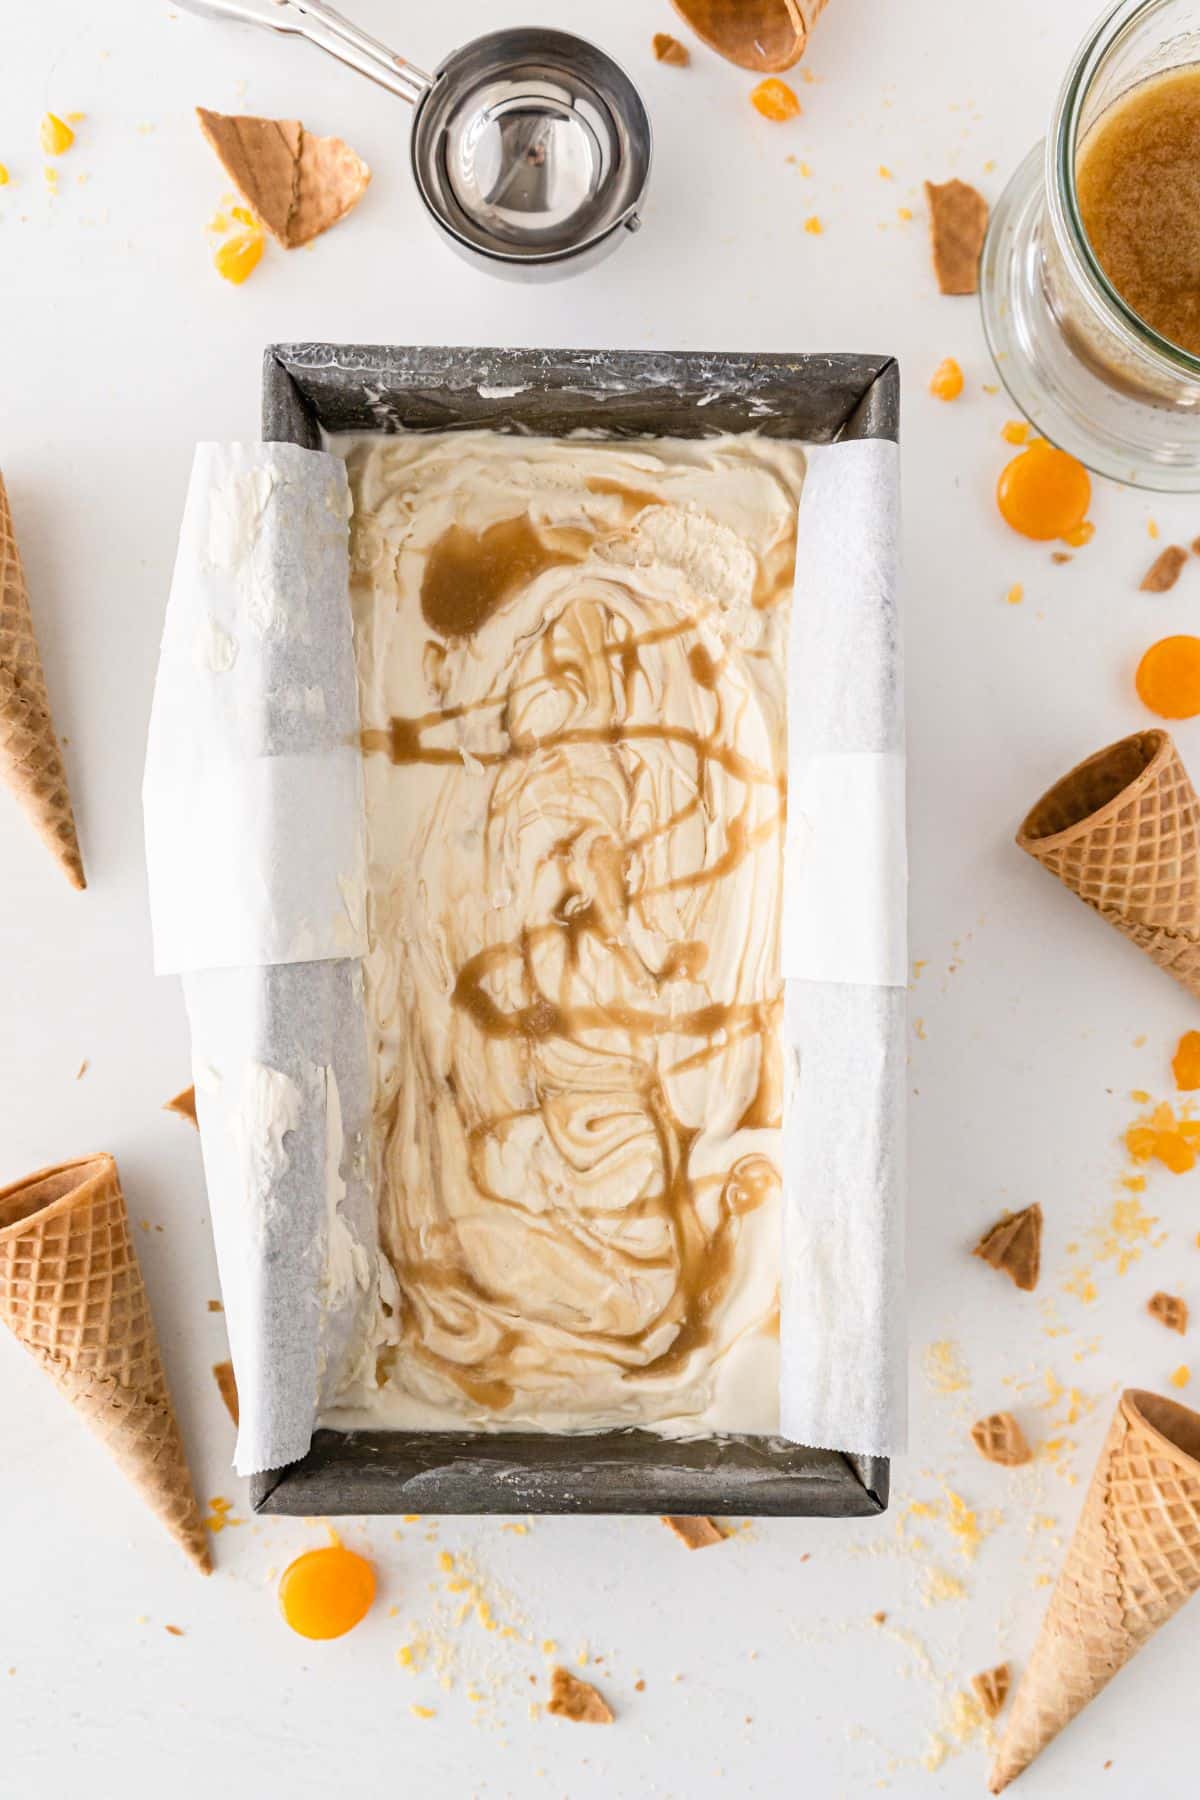  the butterscotch swirled  into the ice cream 